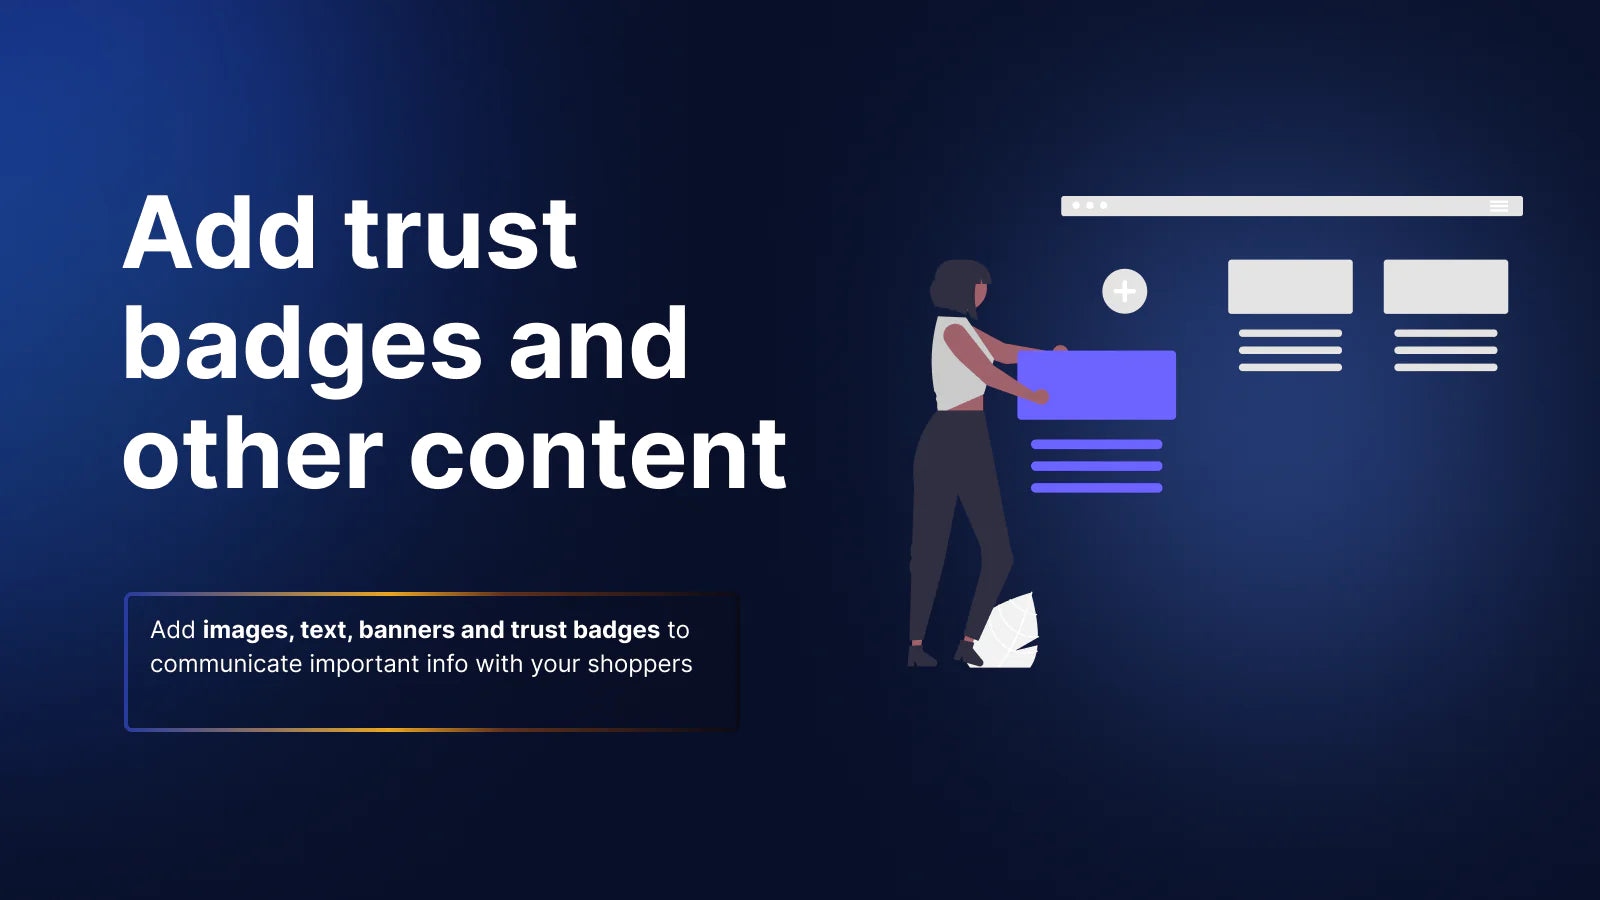 the image shows that you can add trust badges and other content